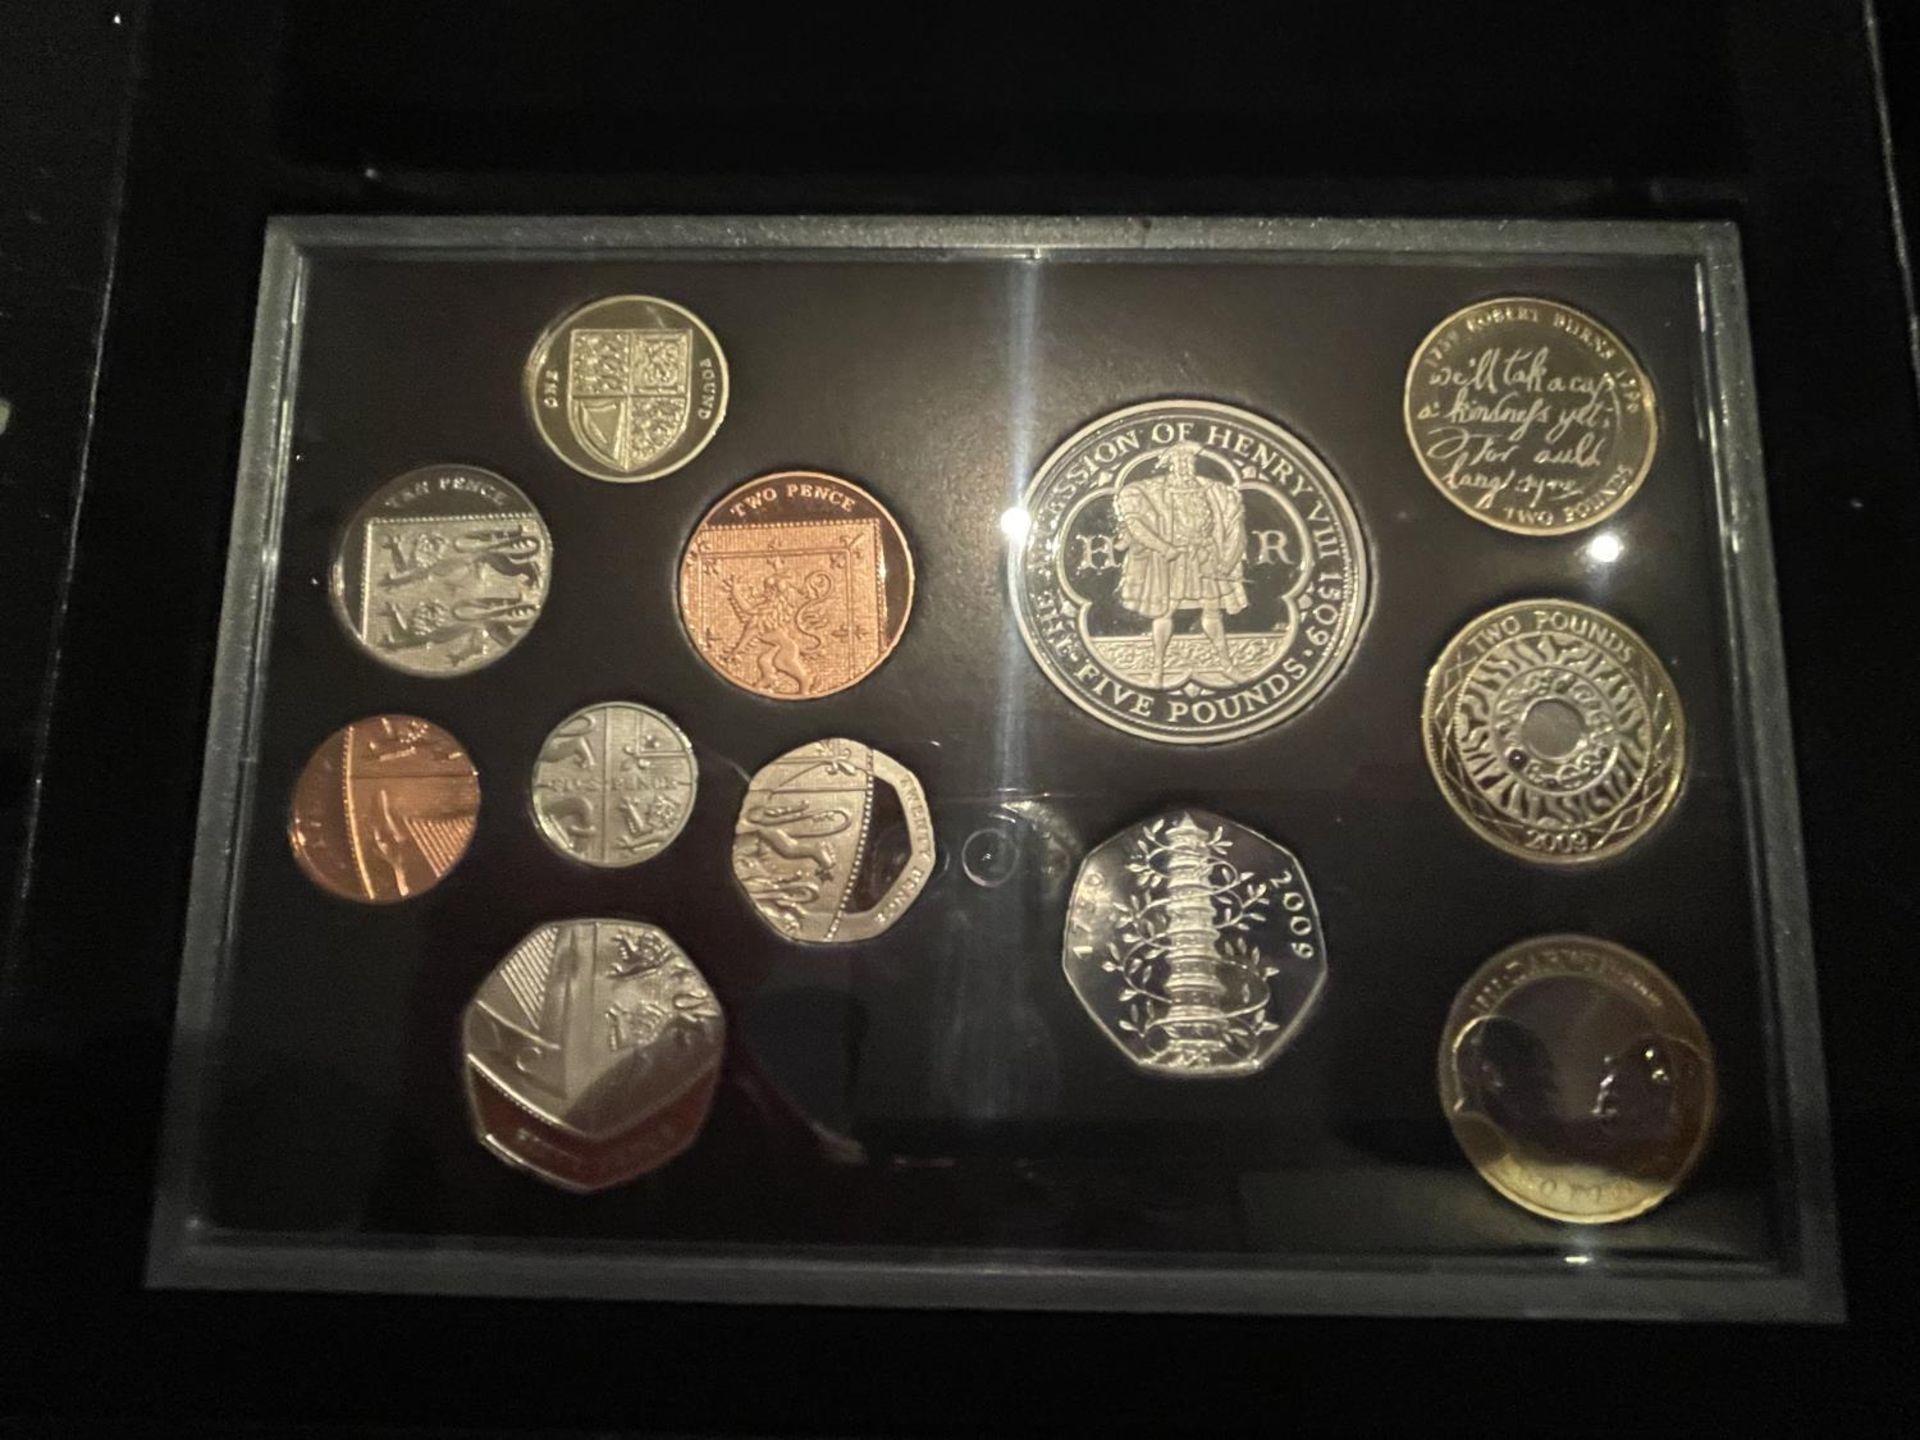 UK , ROYAL MINT , 2009 COIN SET , WITH KEW GARDENS 50P . PRISTINE CONDITION . E 350/400 R 290 . - Image 3 of 3